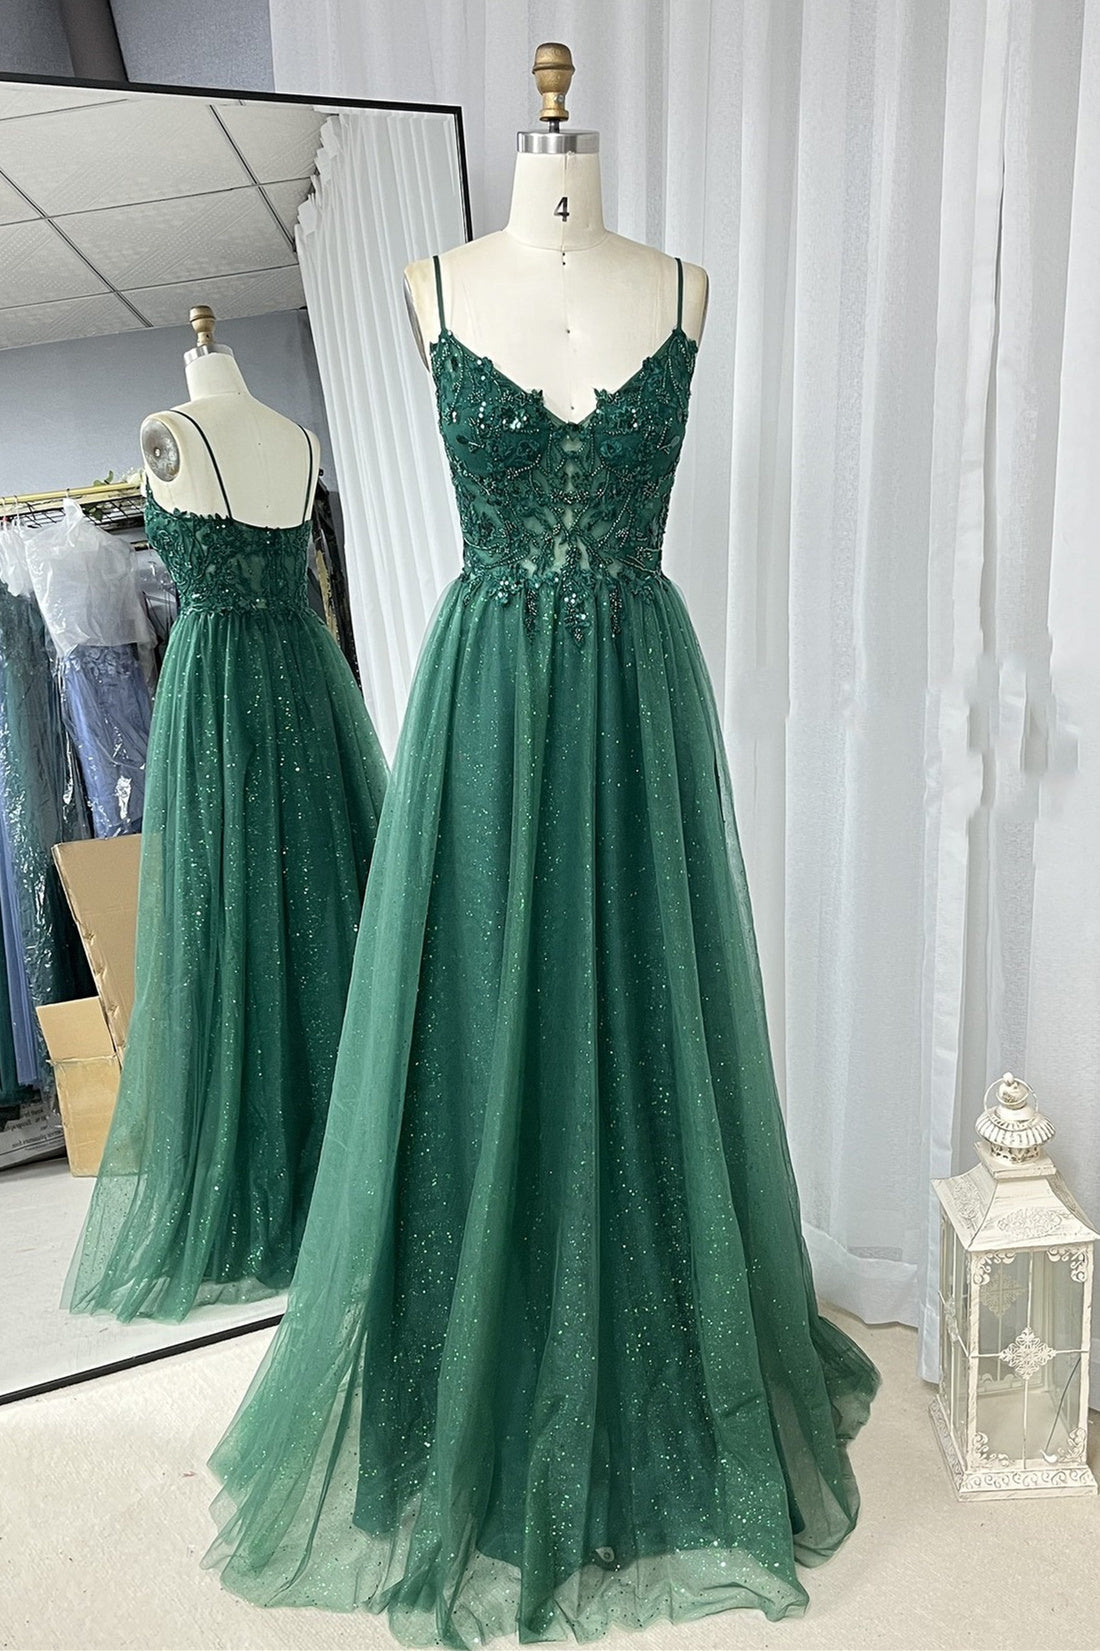 Wedding Pictures Ideas, Hunter Green A-line Beaded Applique Straps Tulle Long Prom Dress